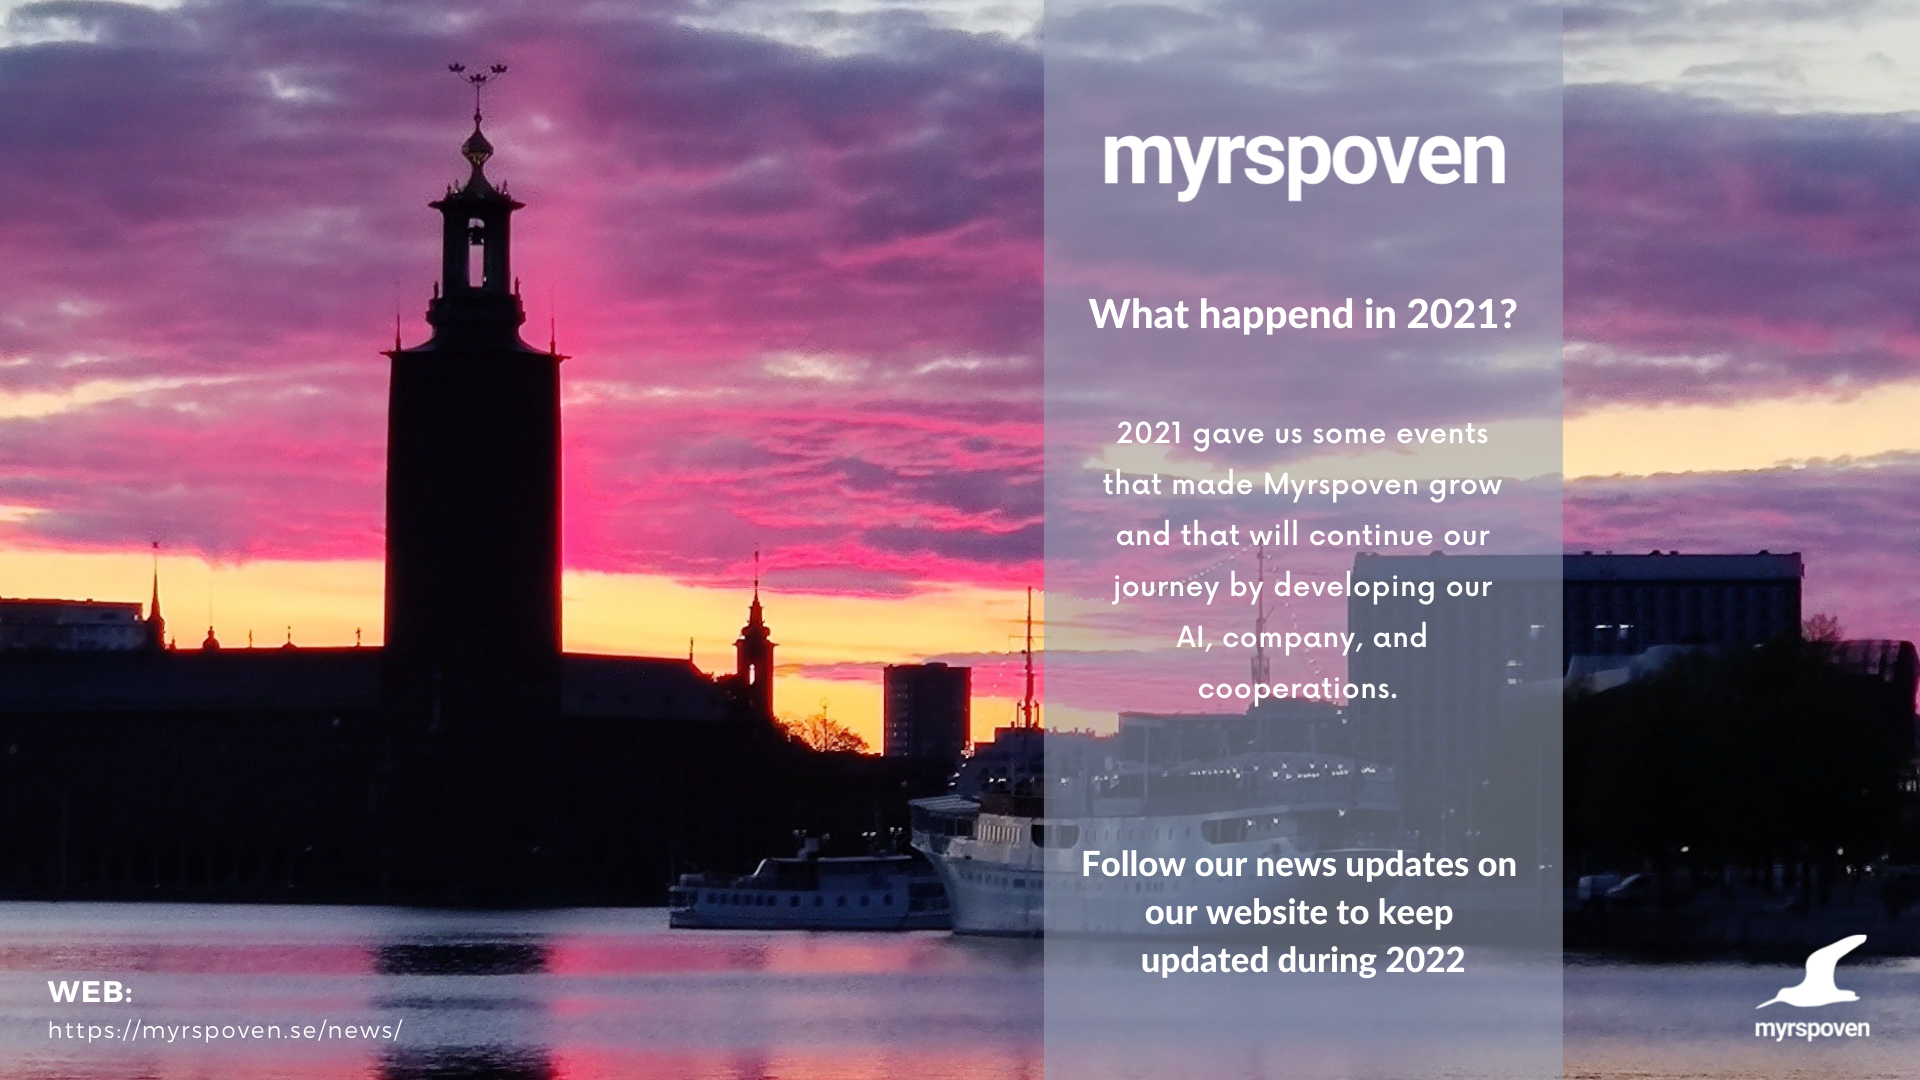 Myrspoven: Looking back at 2021